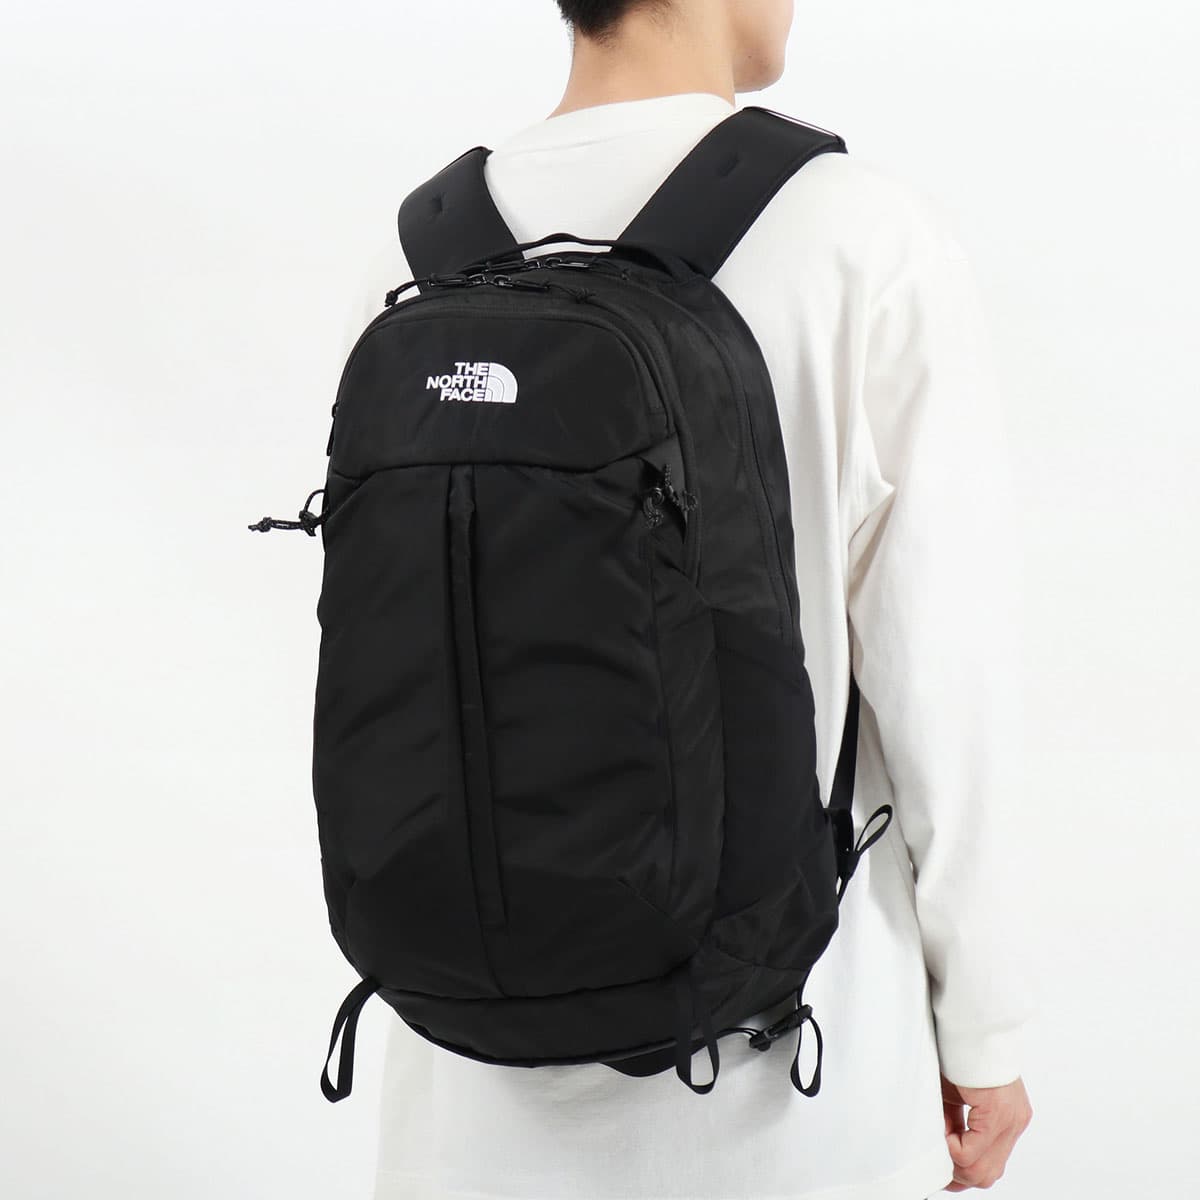 THE NORTH FACE Vostok ボストーク バックパック